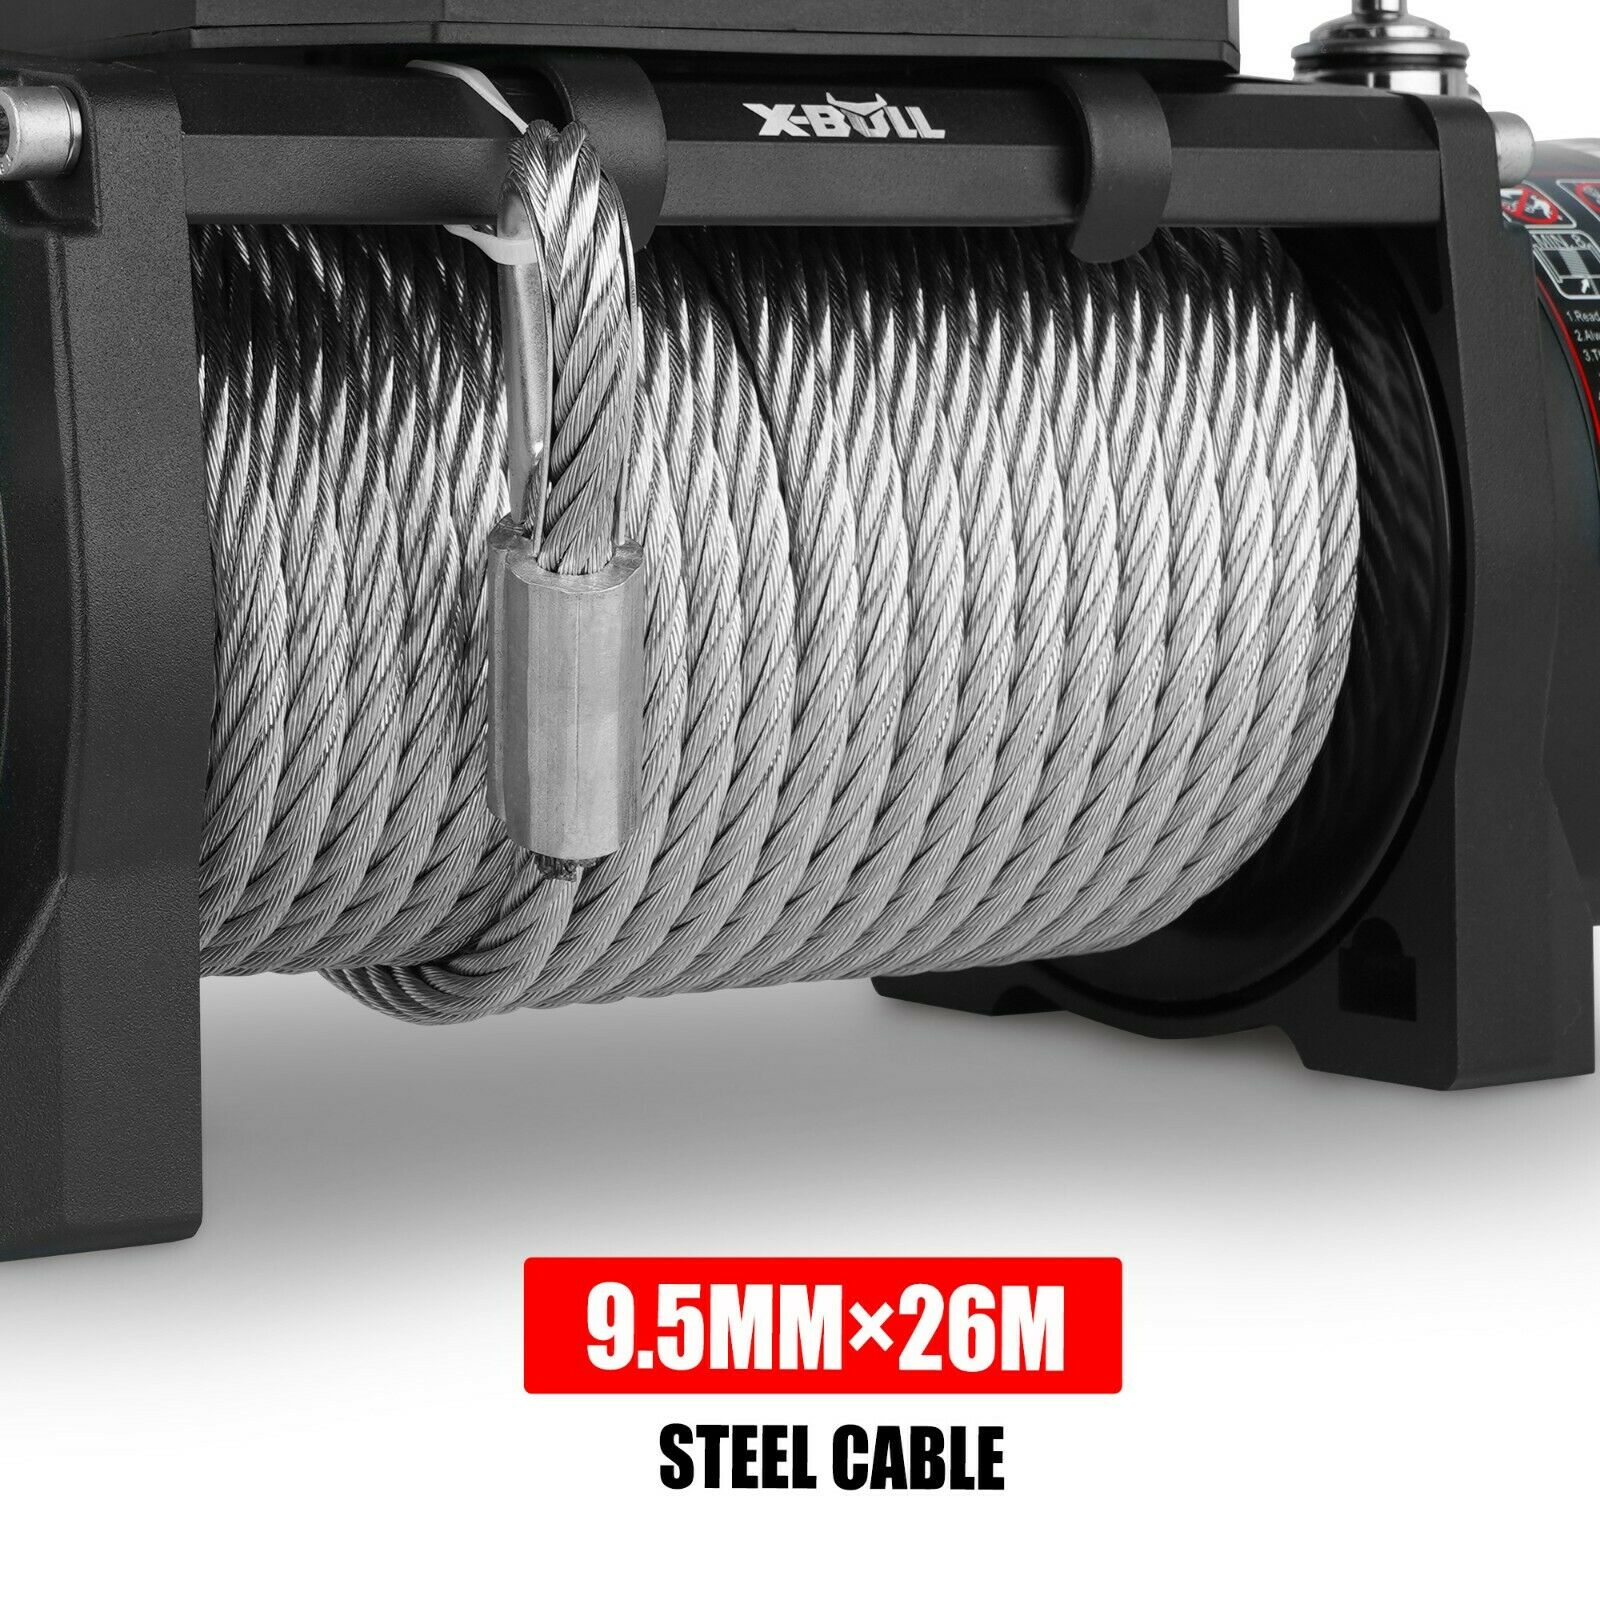 x-bull-electric-winch-12000lbs-5454kgs-steel-cable-12v-wireless-remote-offroad